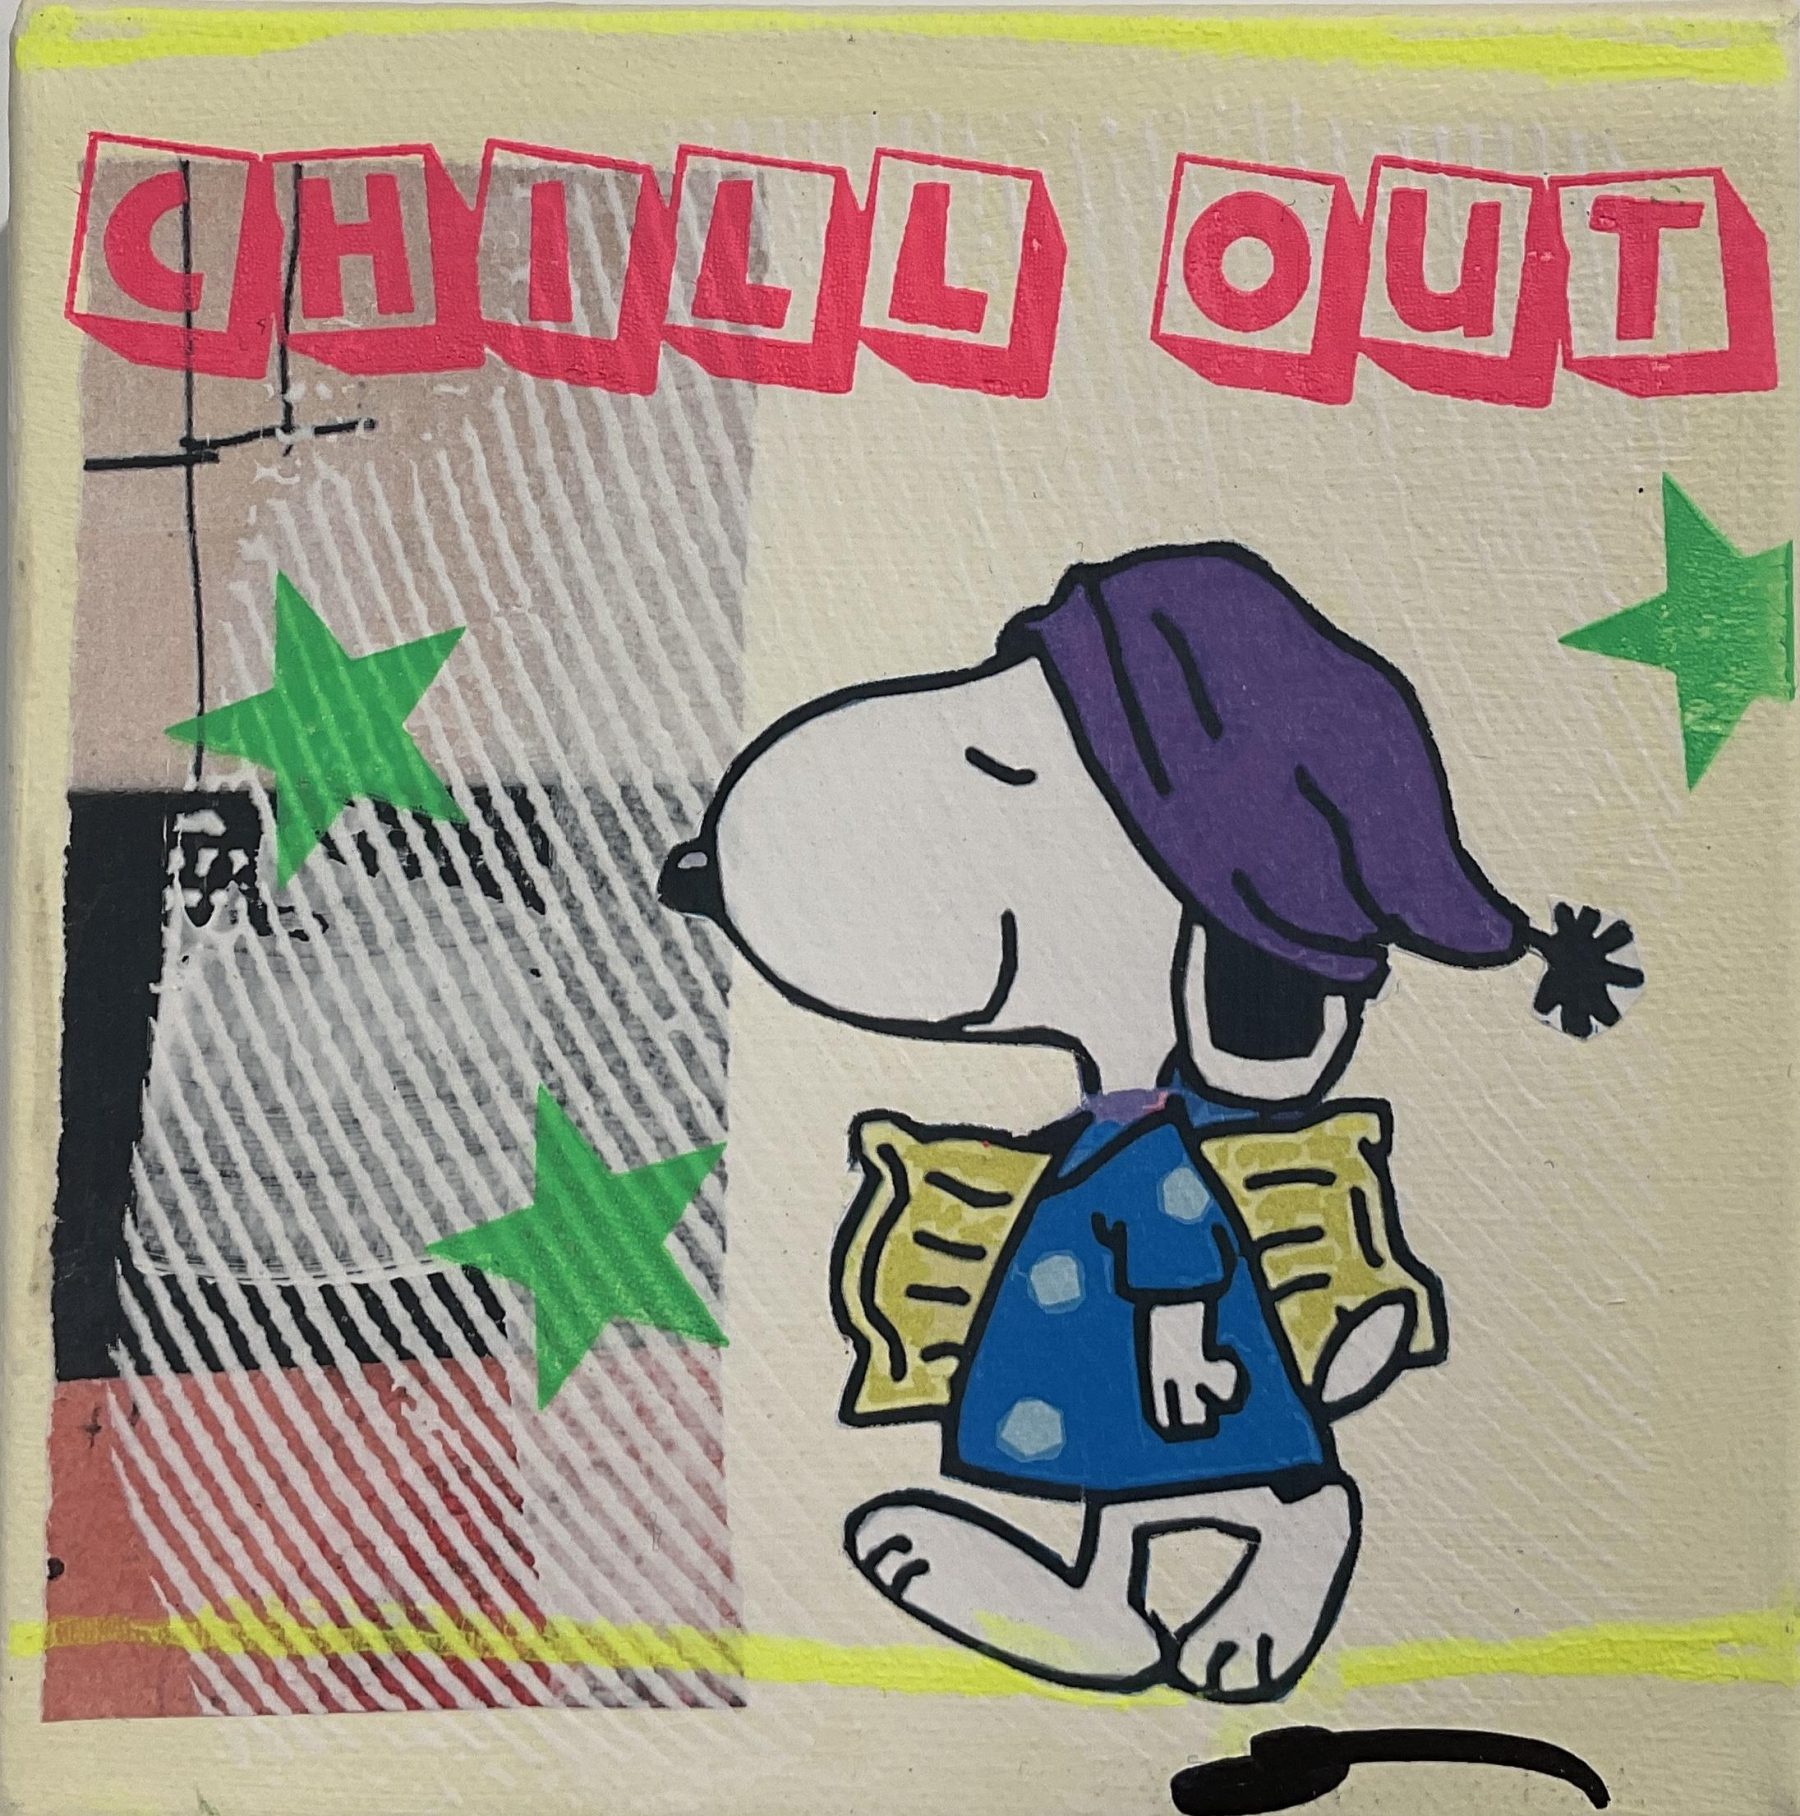 Snoopy "chill out" - Flores, Anna - k-2401AF07